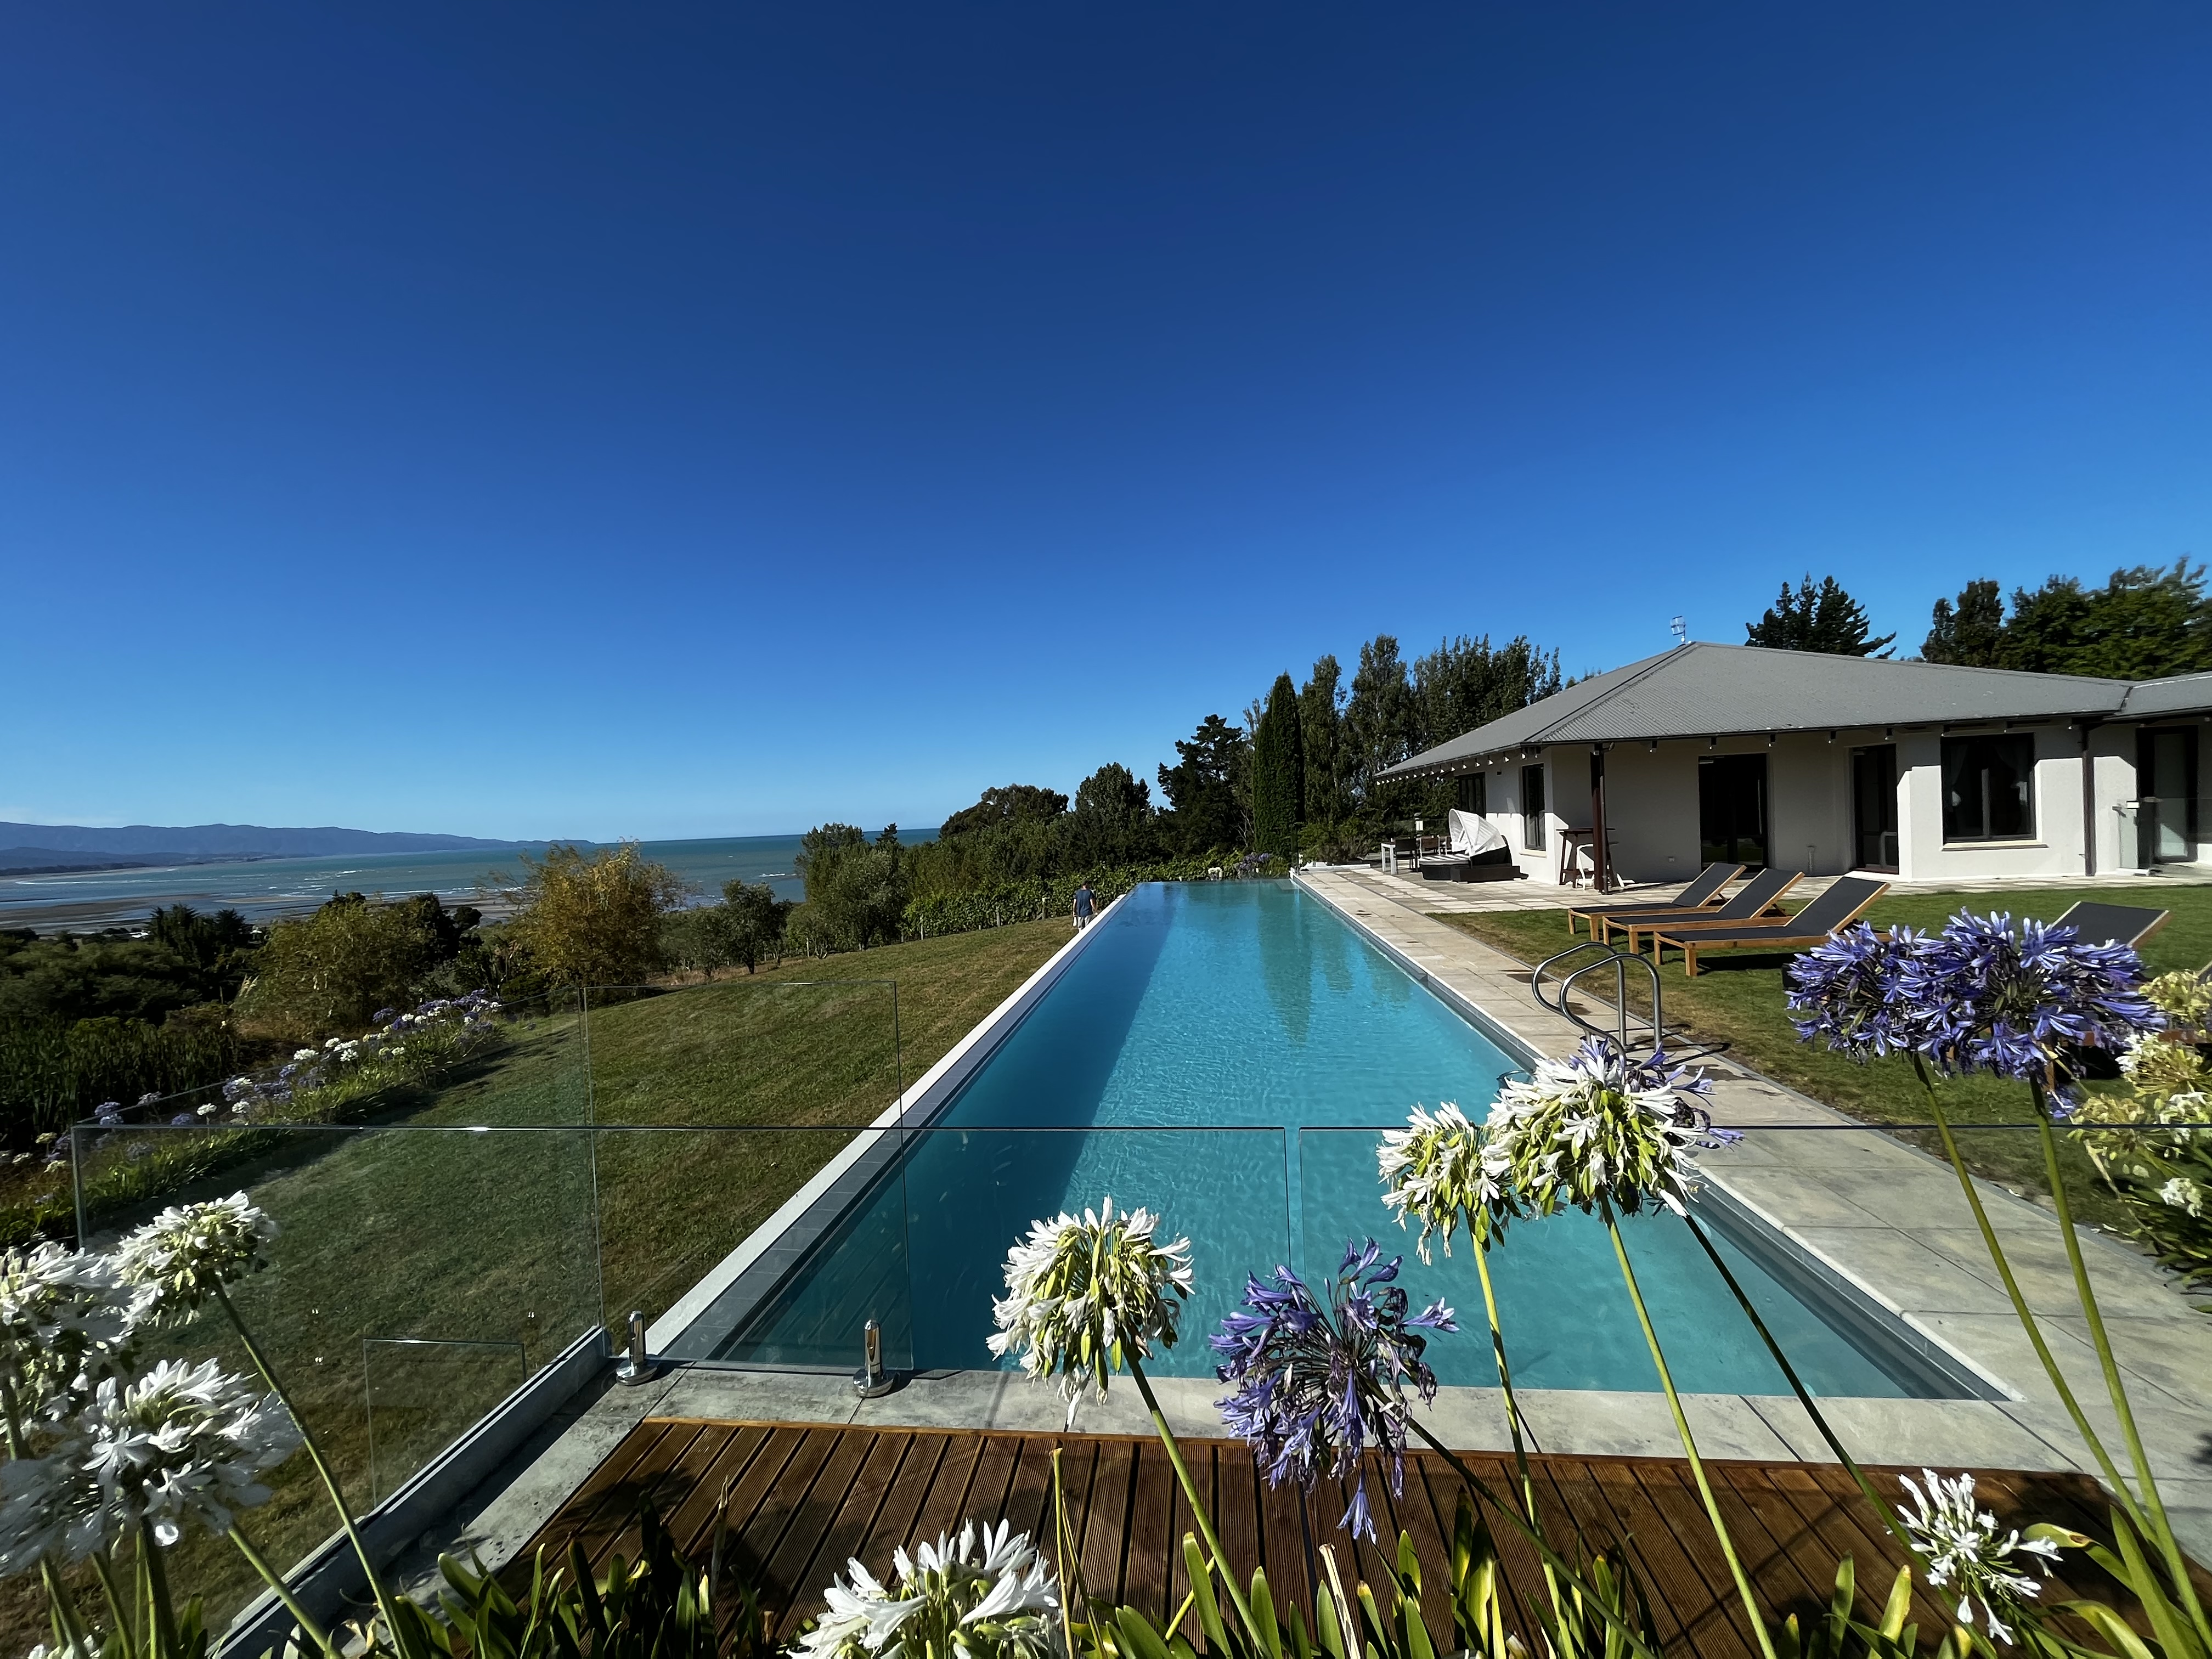 The 22 infinity pool overlooking the Tasman Bay and Moutere Inlet.